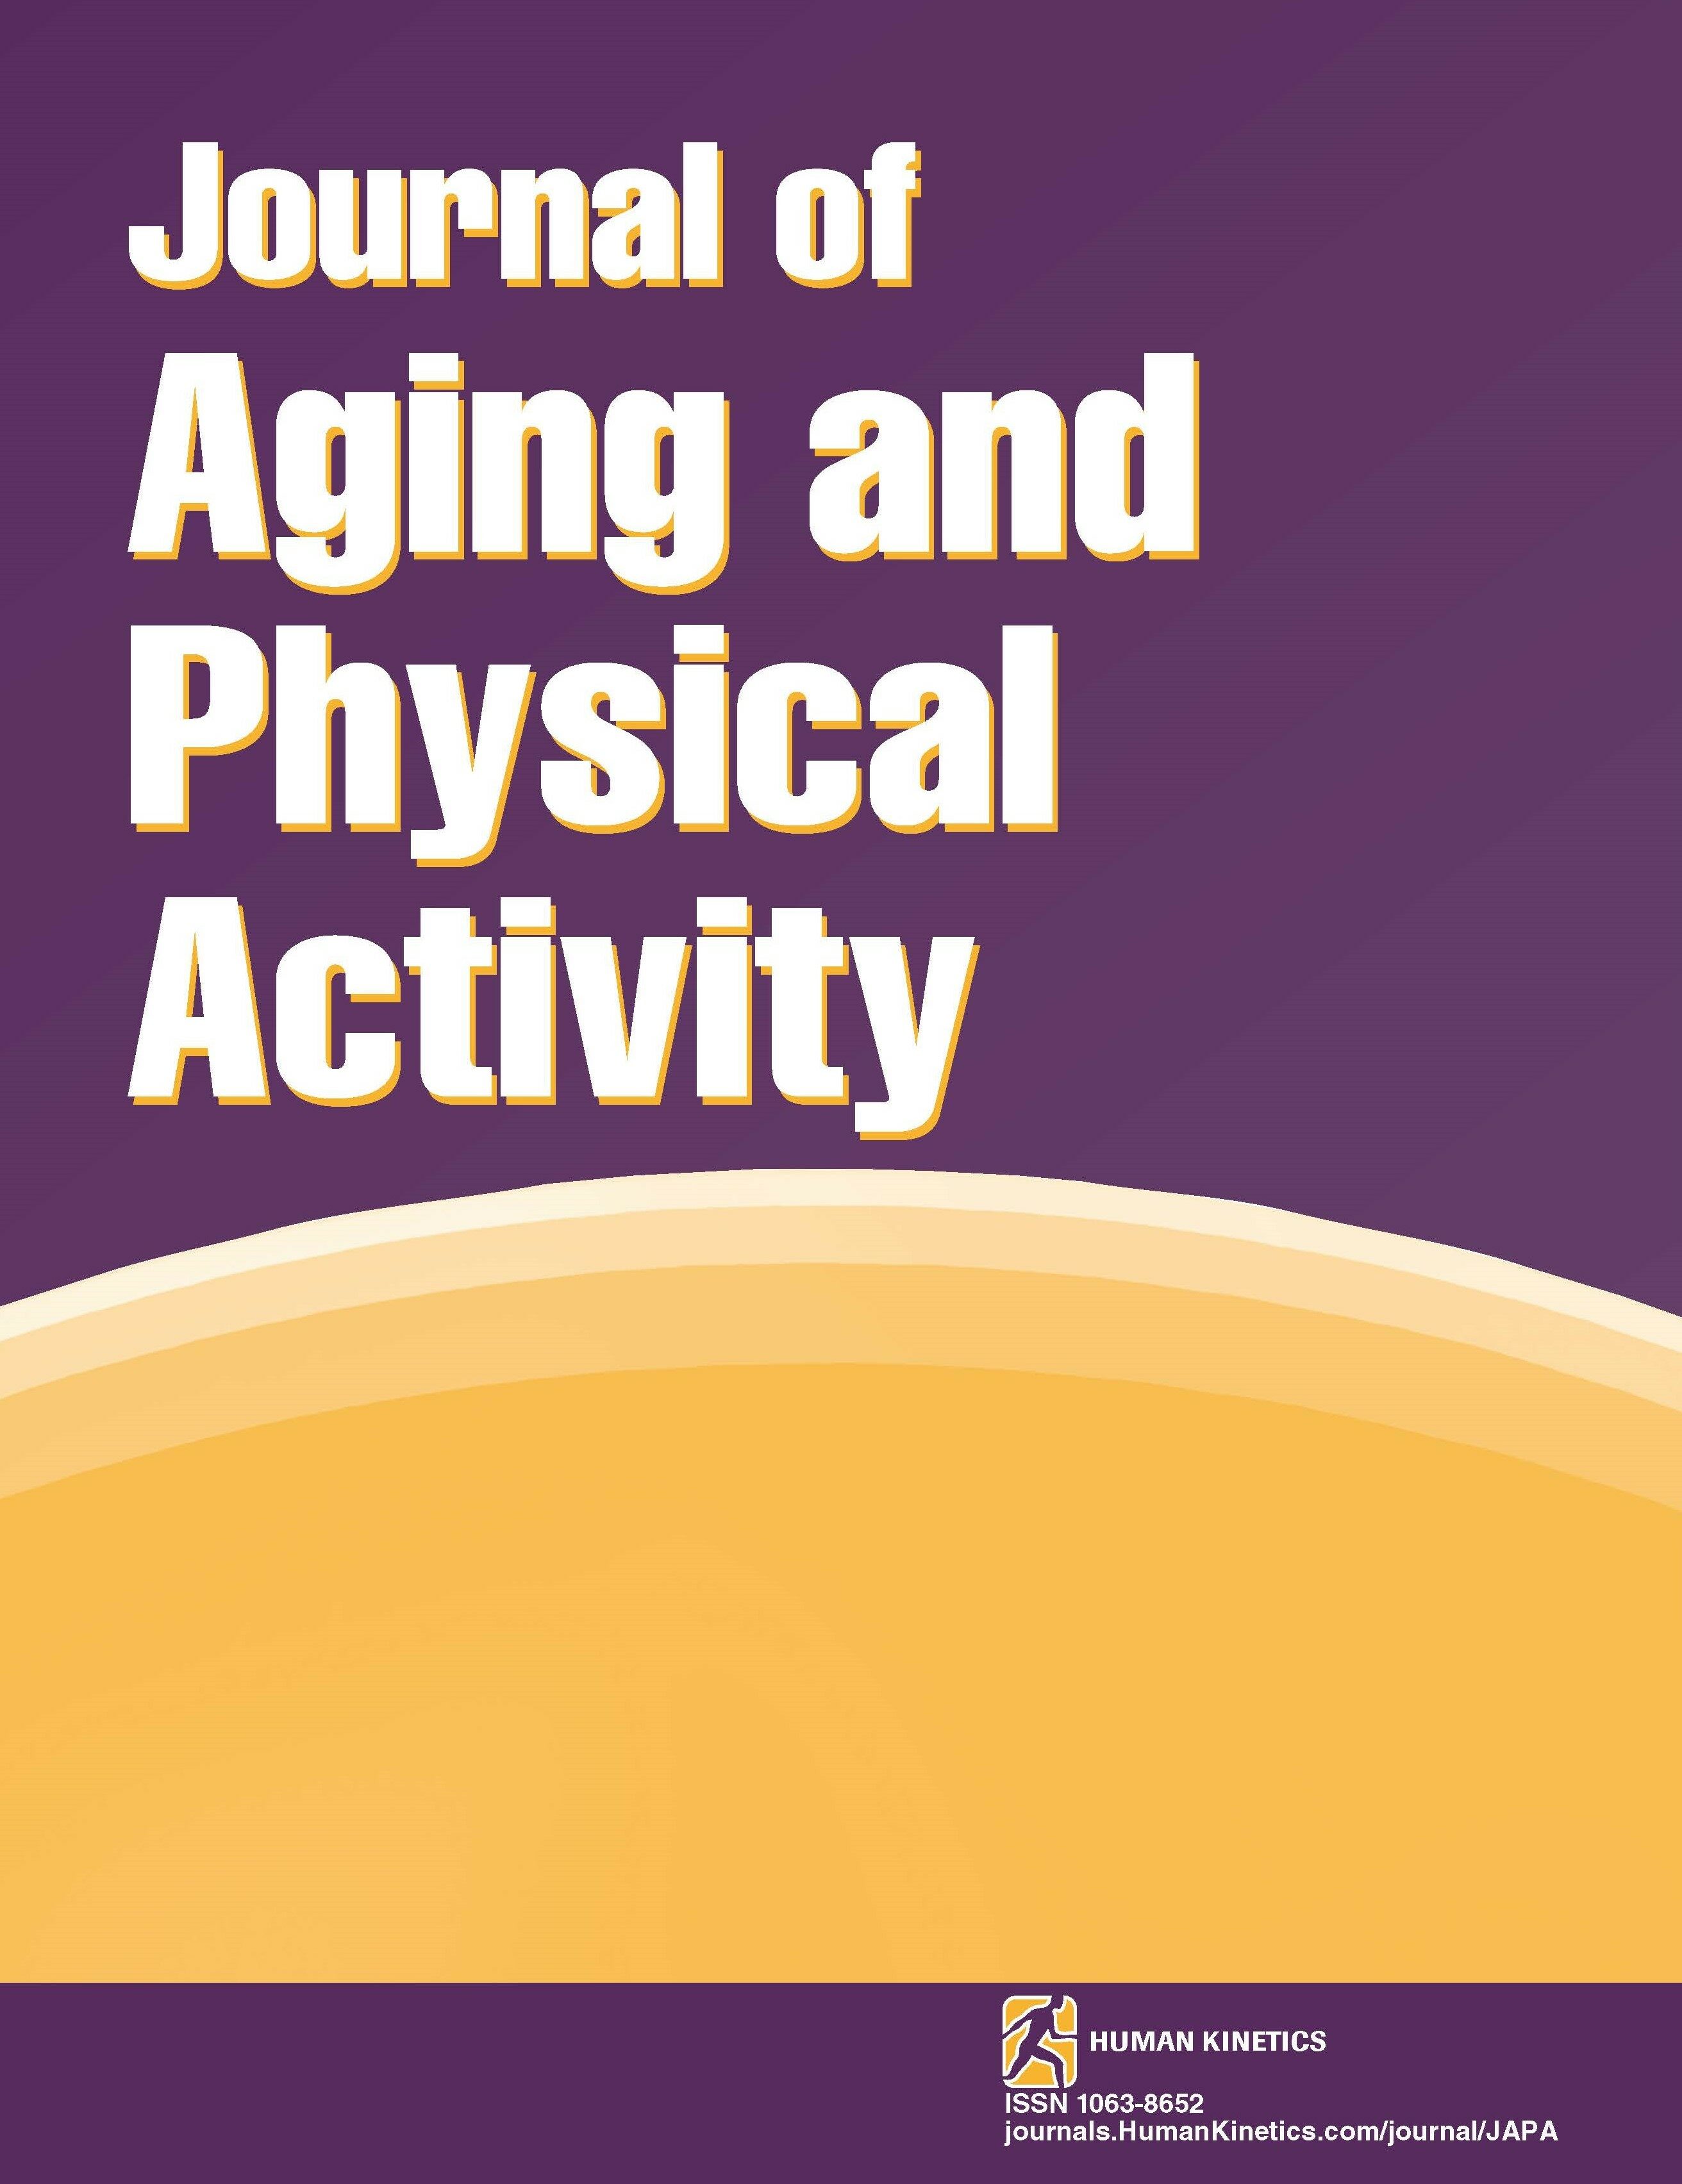 Effectiveness and Benefits of Exercise on Older People Living With Mental Illness’ Physical and Psychological Outcomes in Regional Australia: A Mixed-Methods Study